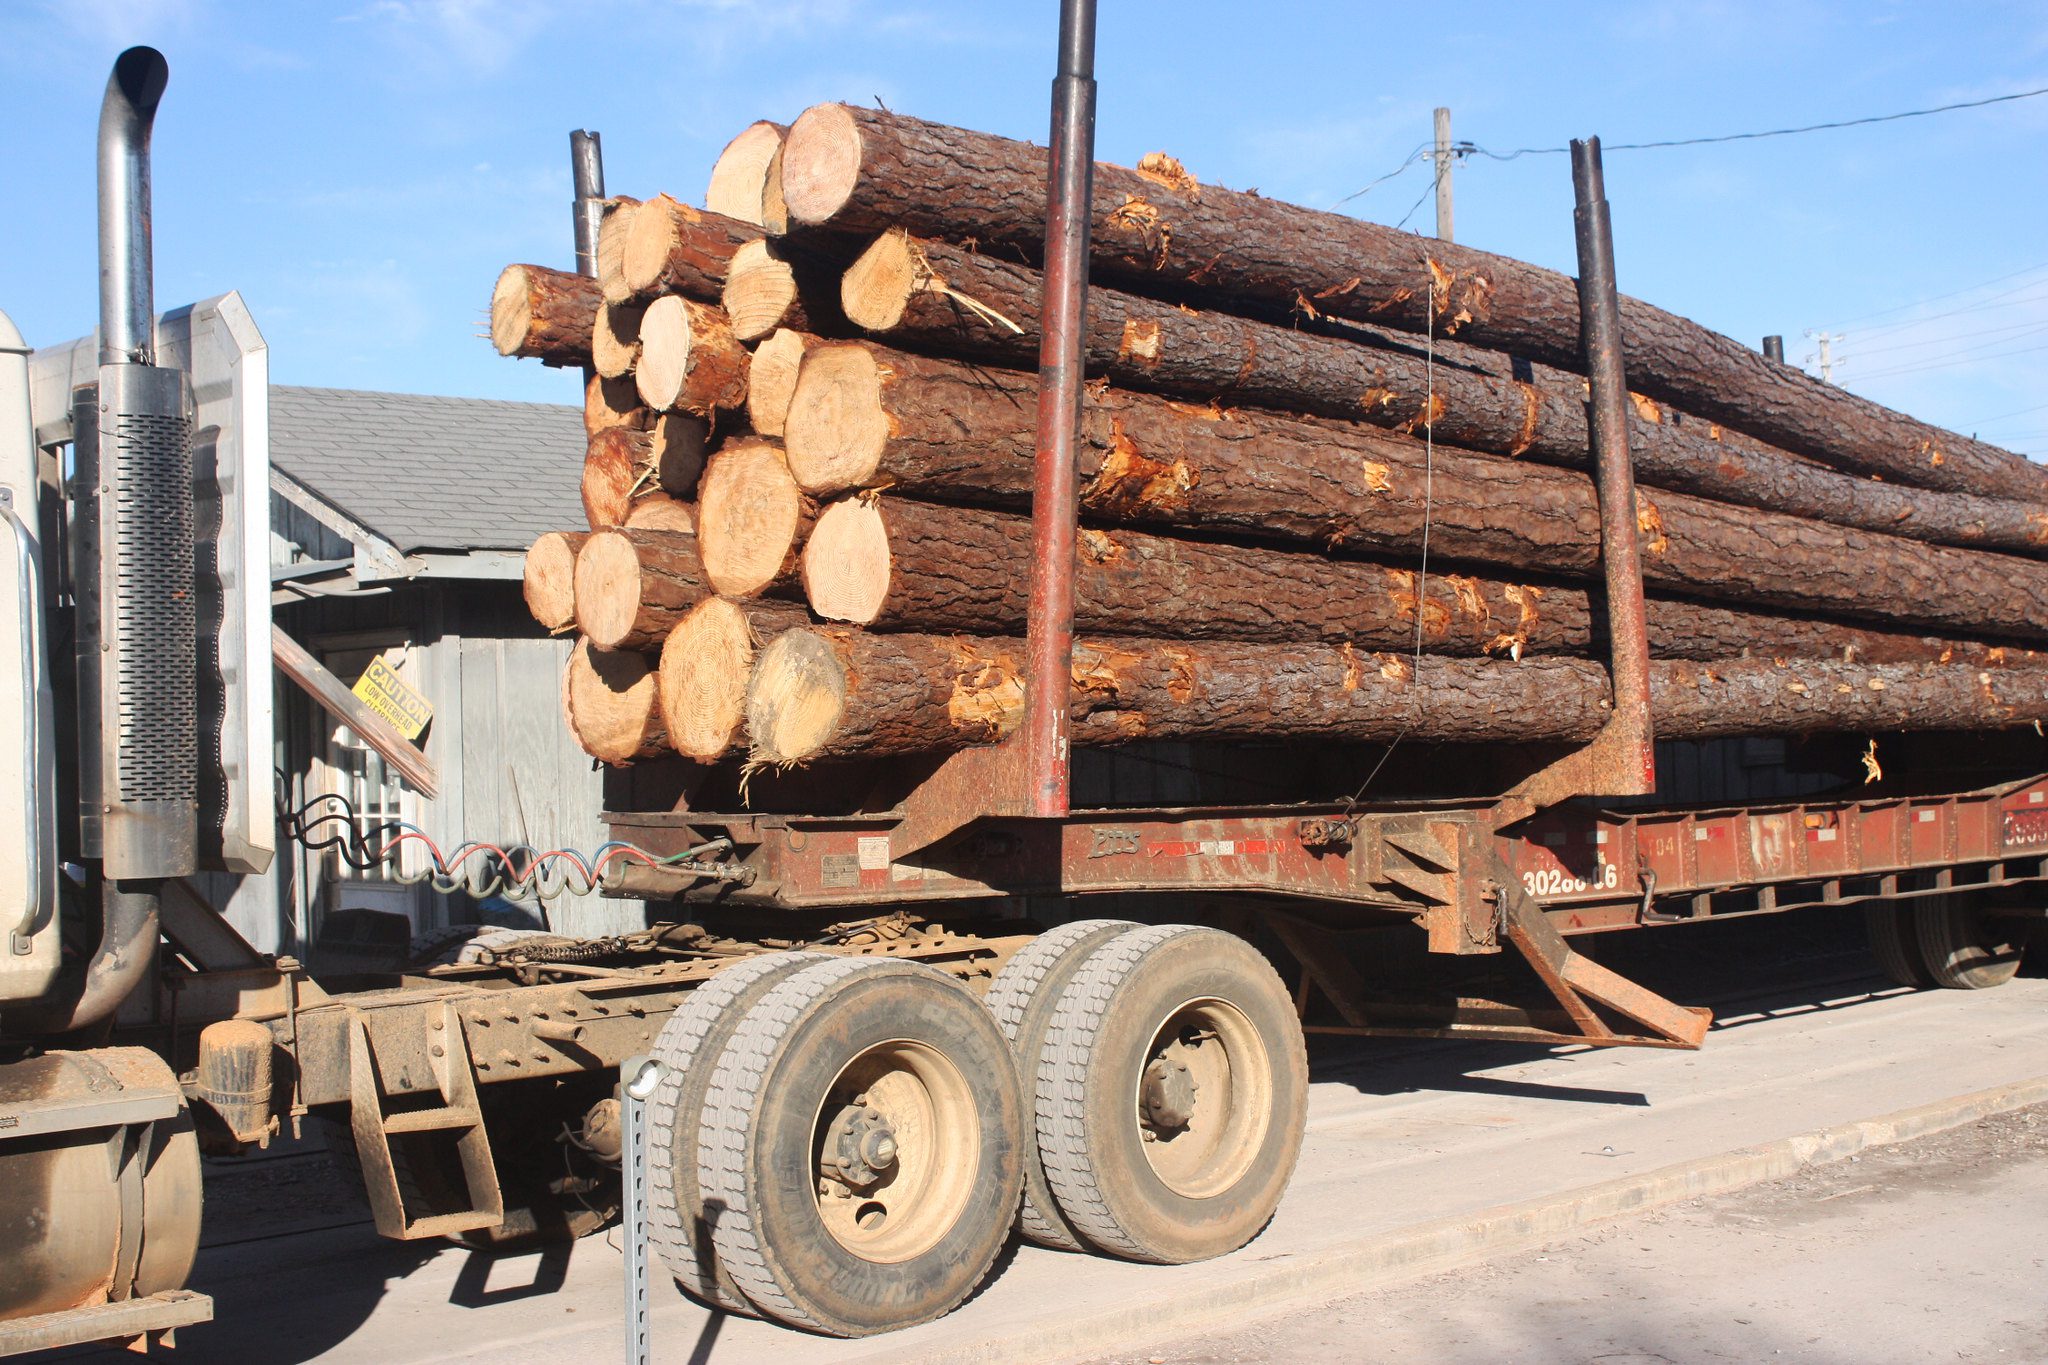 Timber on a truck